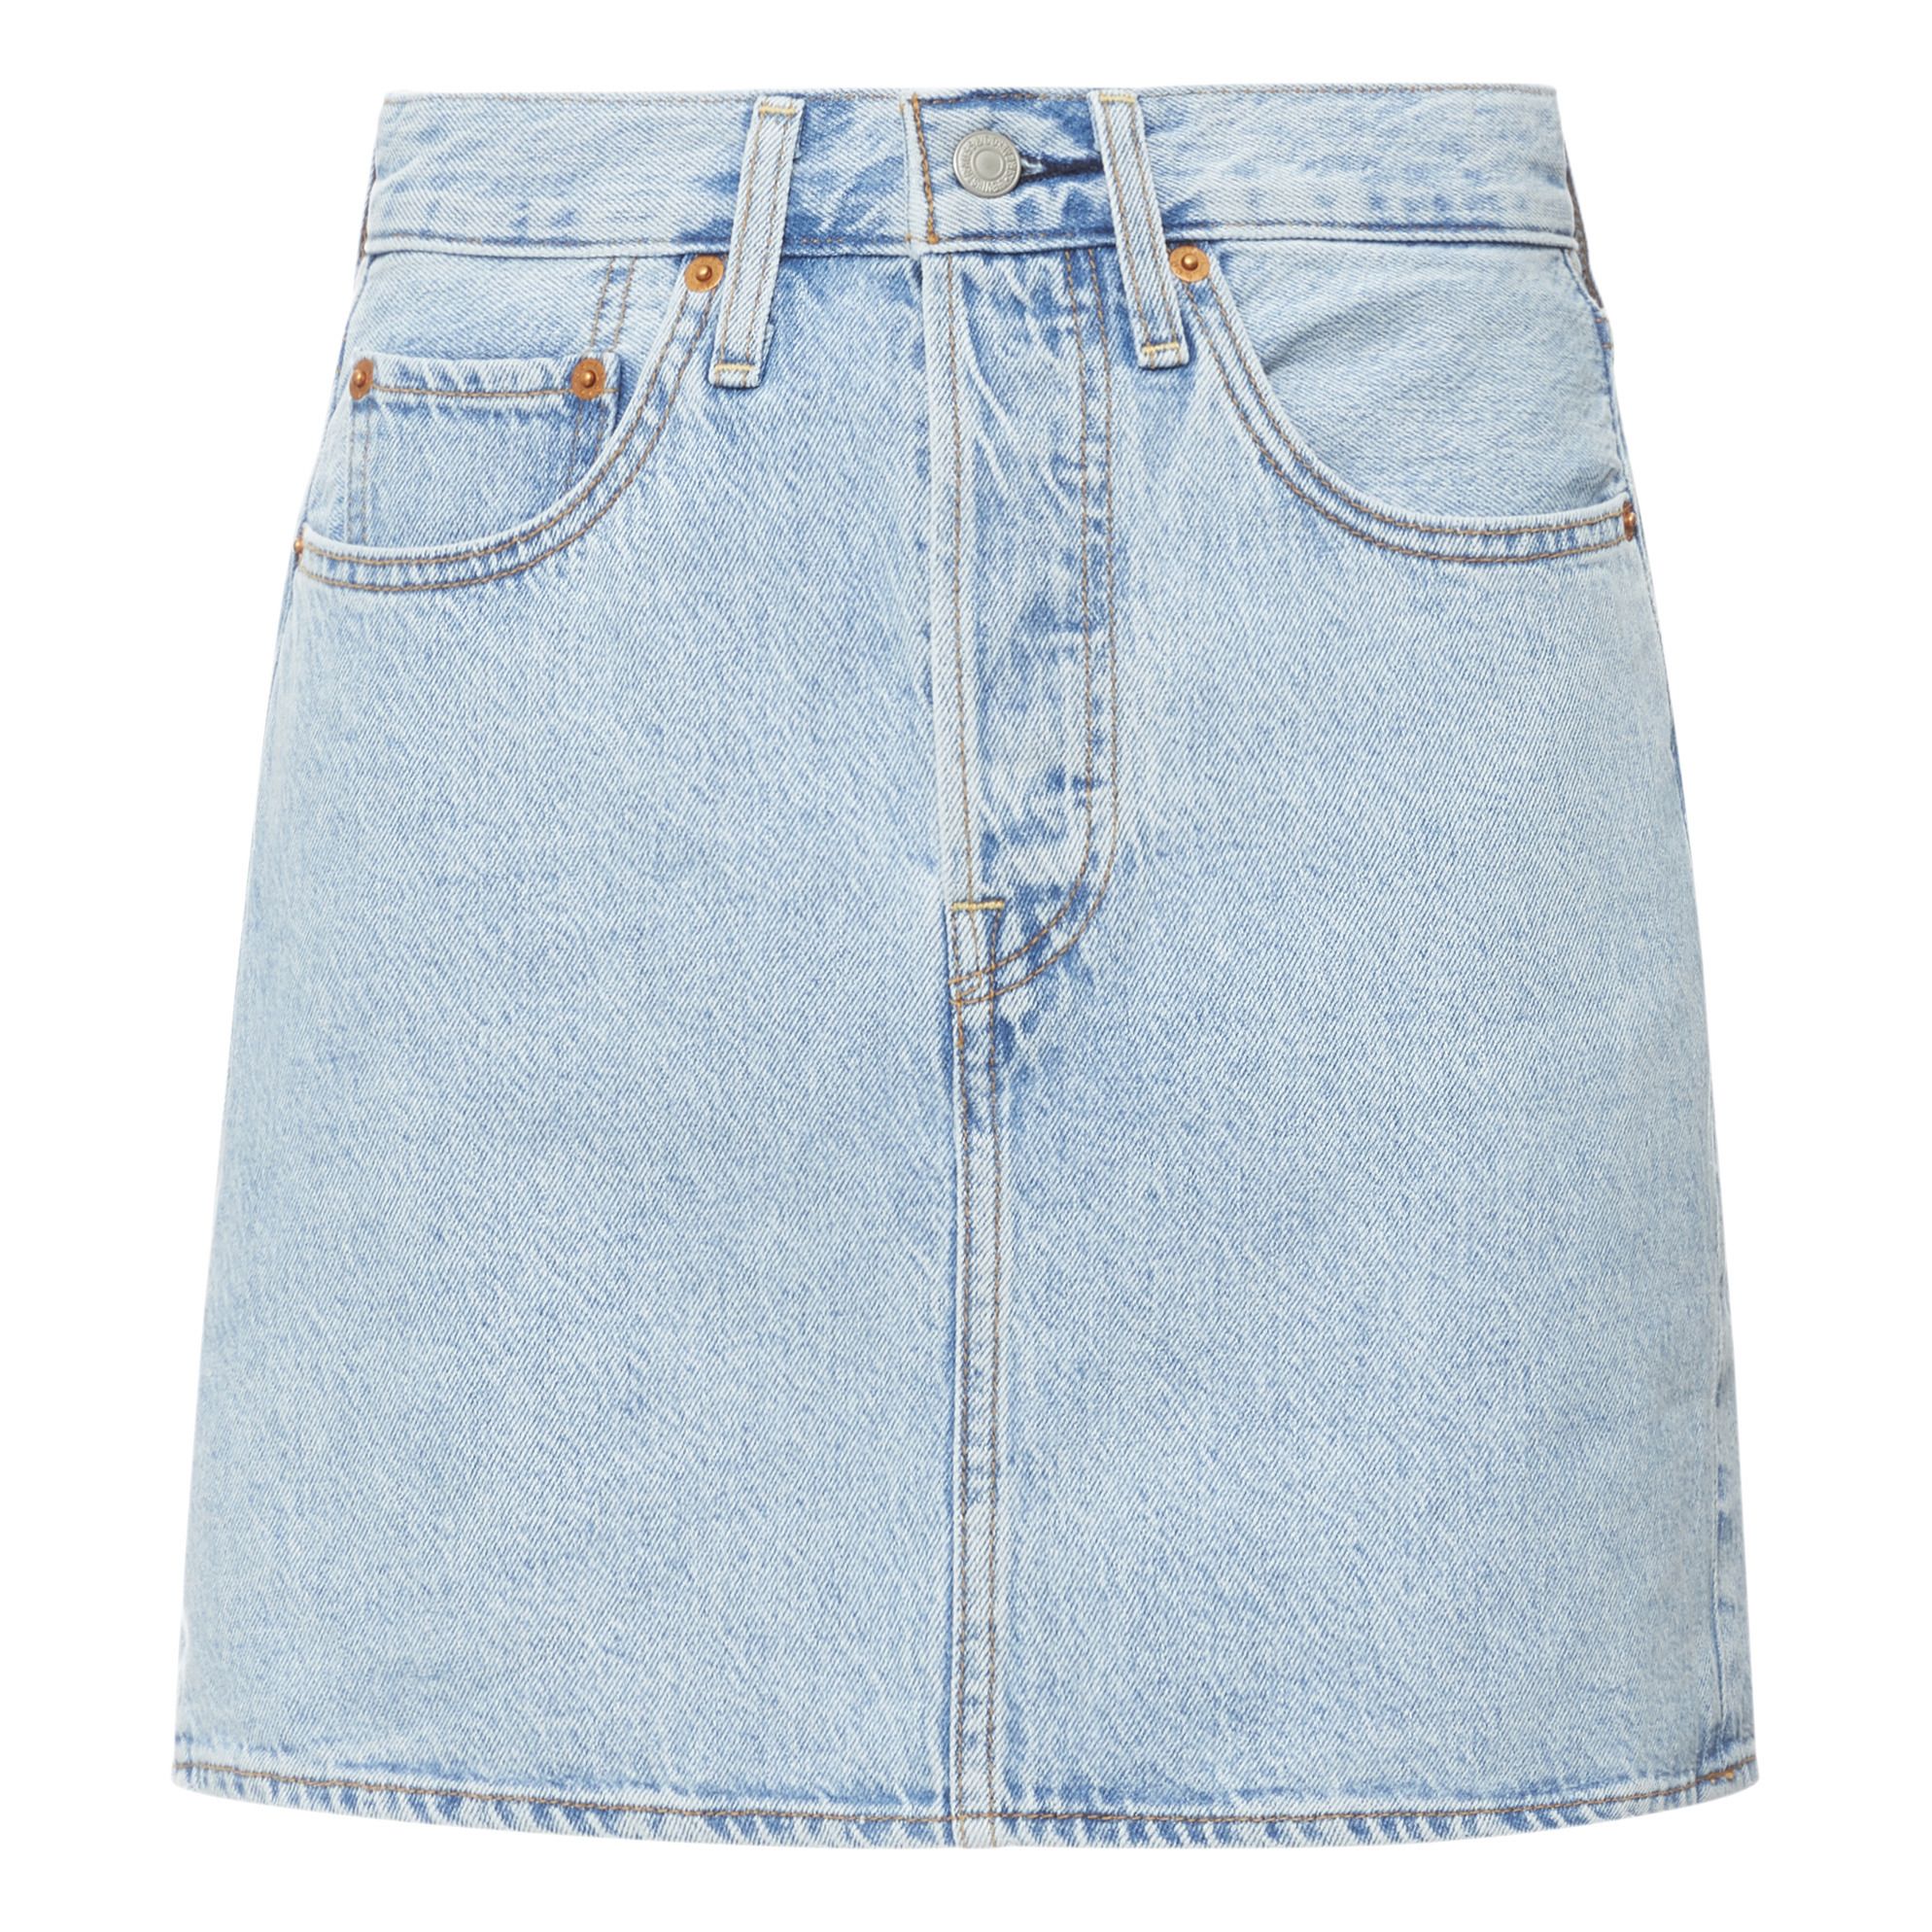 Levi's Made & Crafted - Levi's Denim Skirt - Light Blue | Smallable